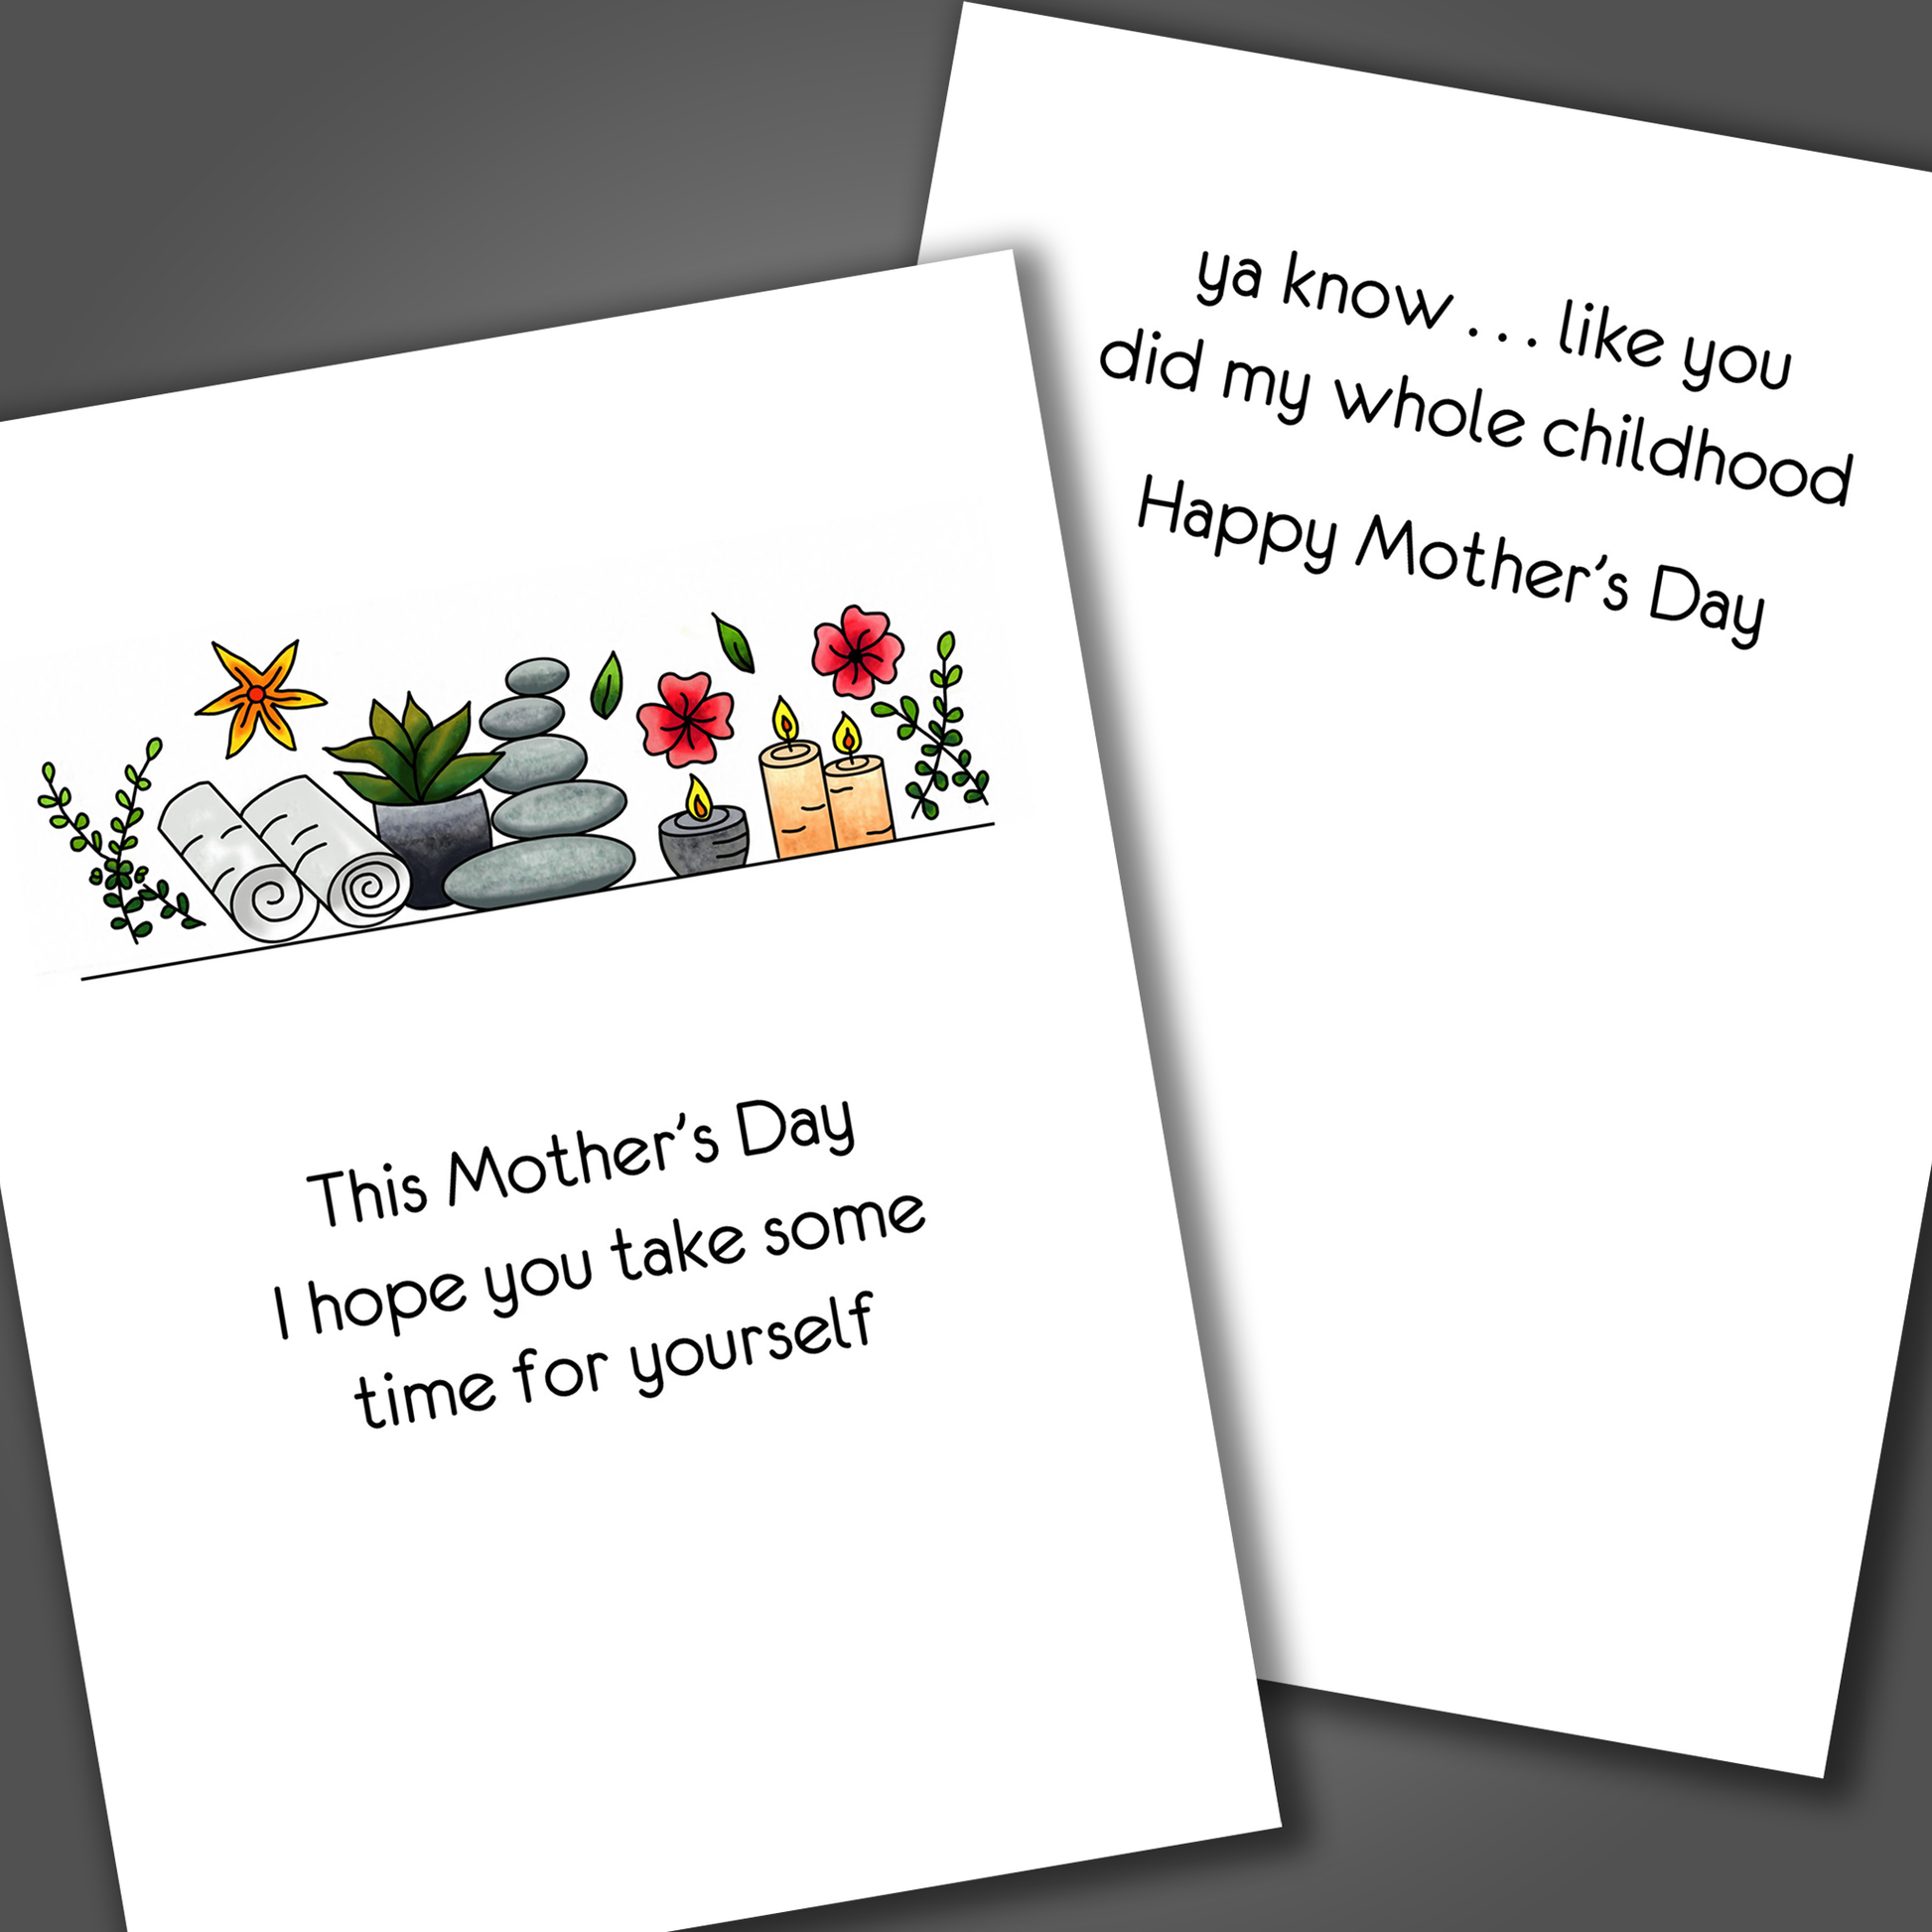 Funny happy mother's day card with flowers and relaxing candles drawn on the front of the card. Inside the card is a funny joke that calls mom lazy and ends with happy mother's day!